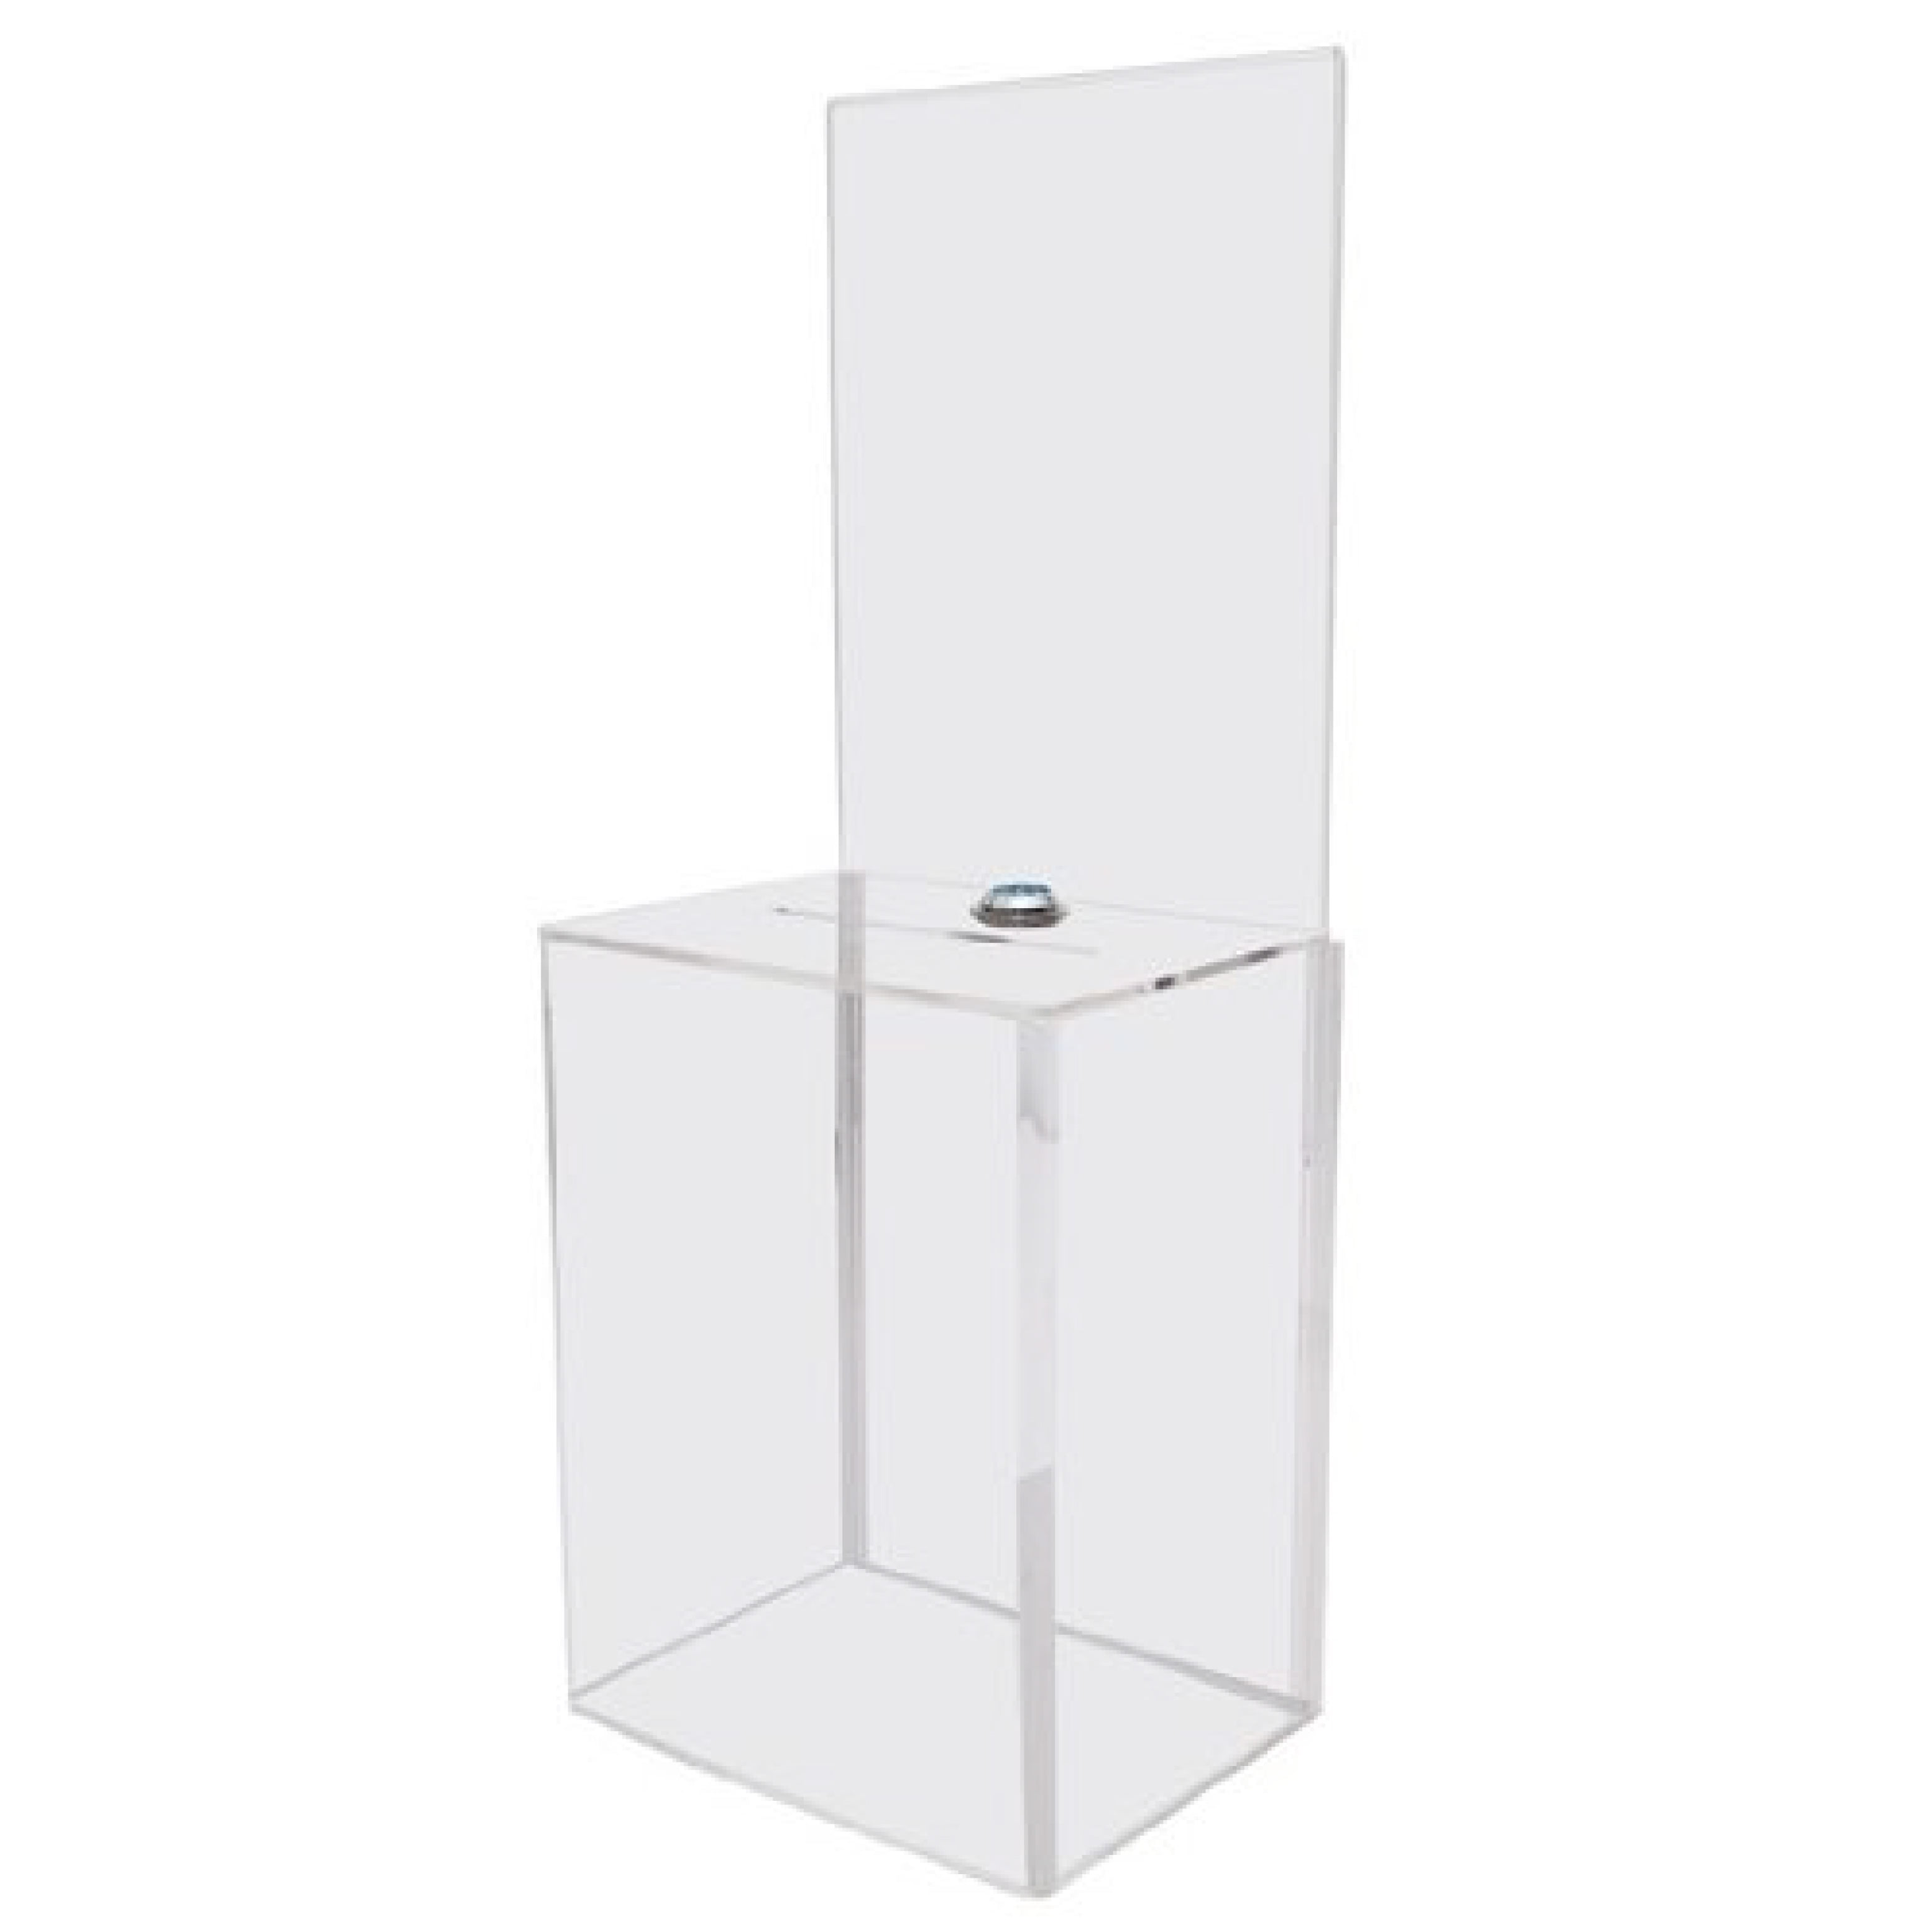 MCB Acrylic Donation Box With Back Wall Curved Display Area with lock & 2 keys 